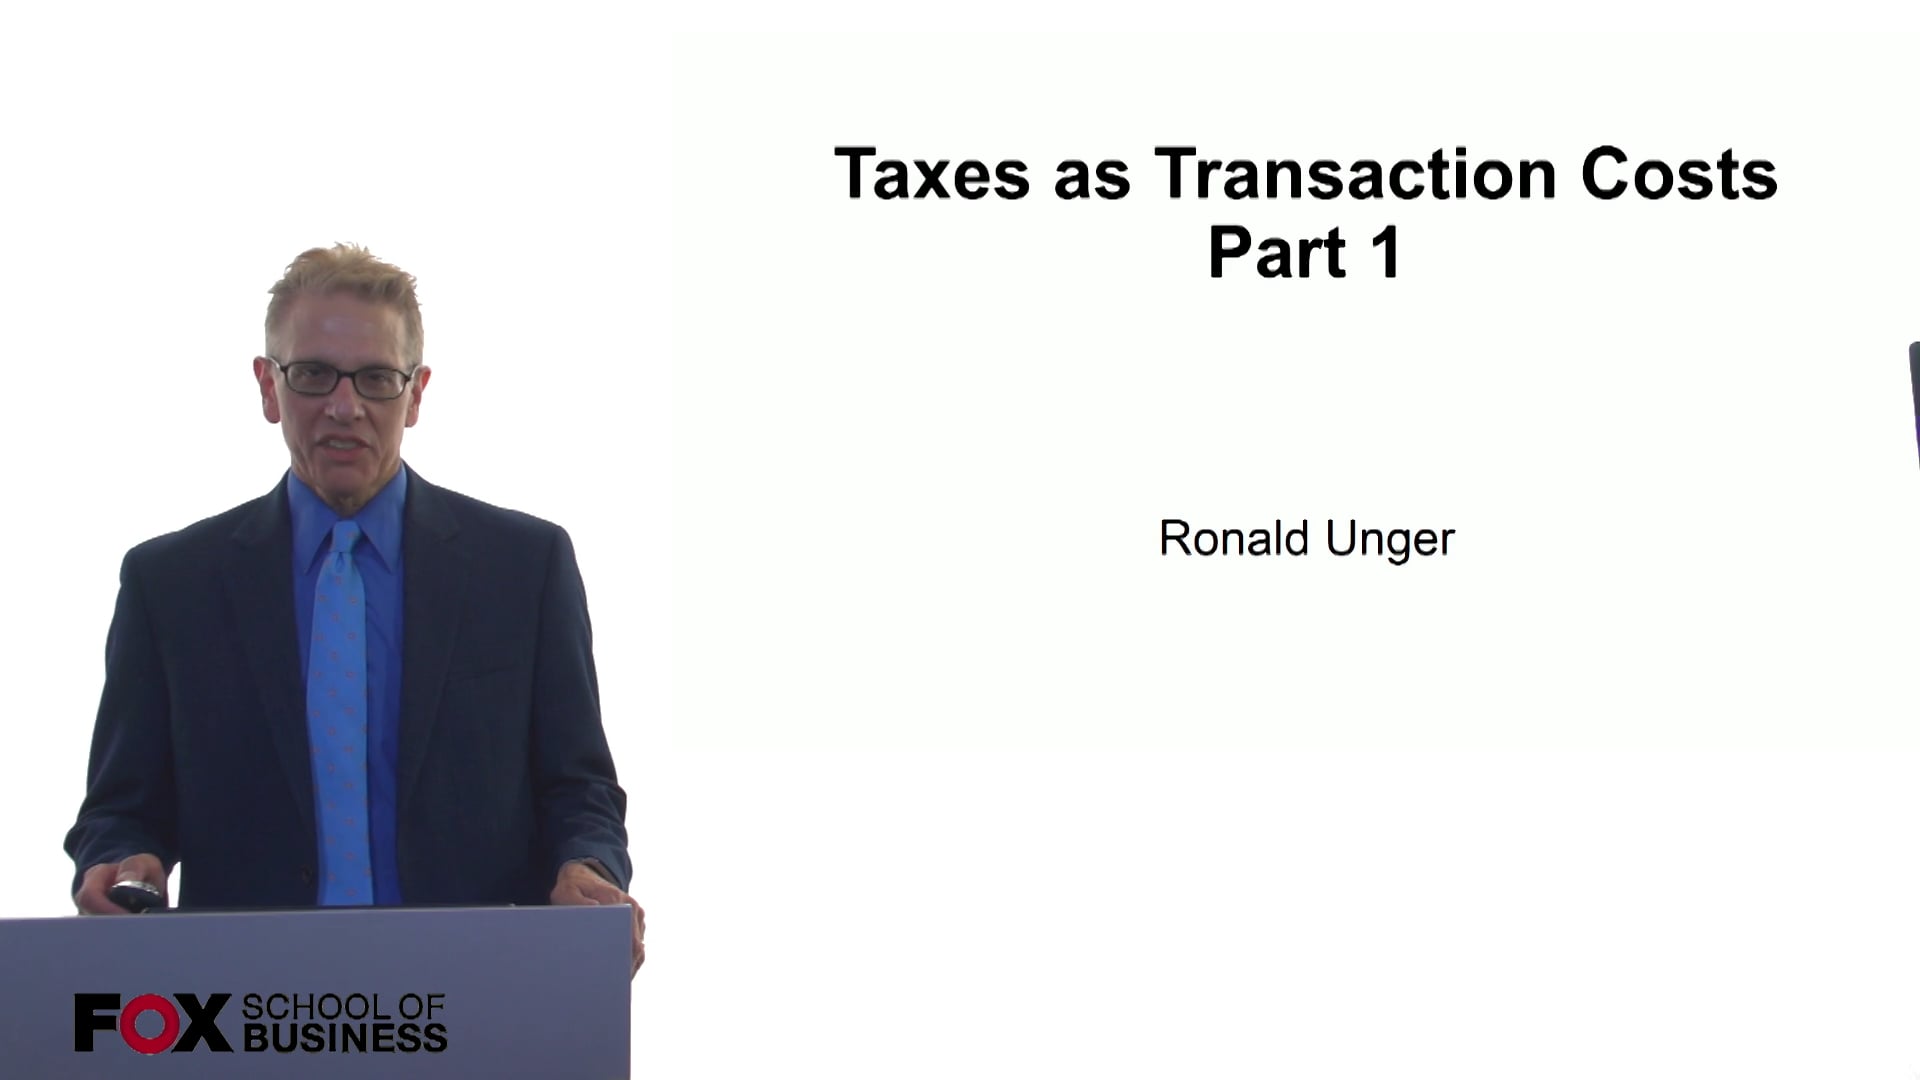 Taxes as Transaction Costs Part 1